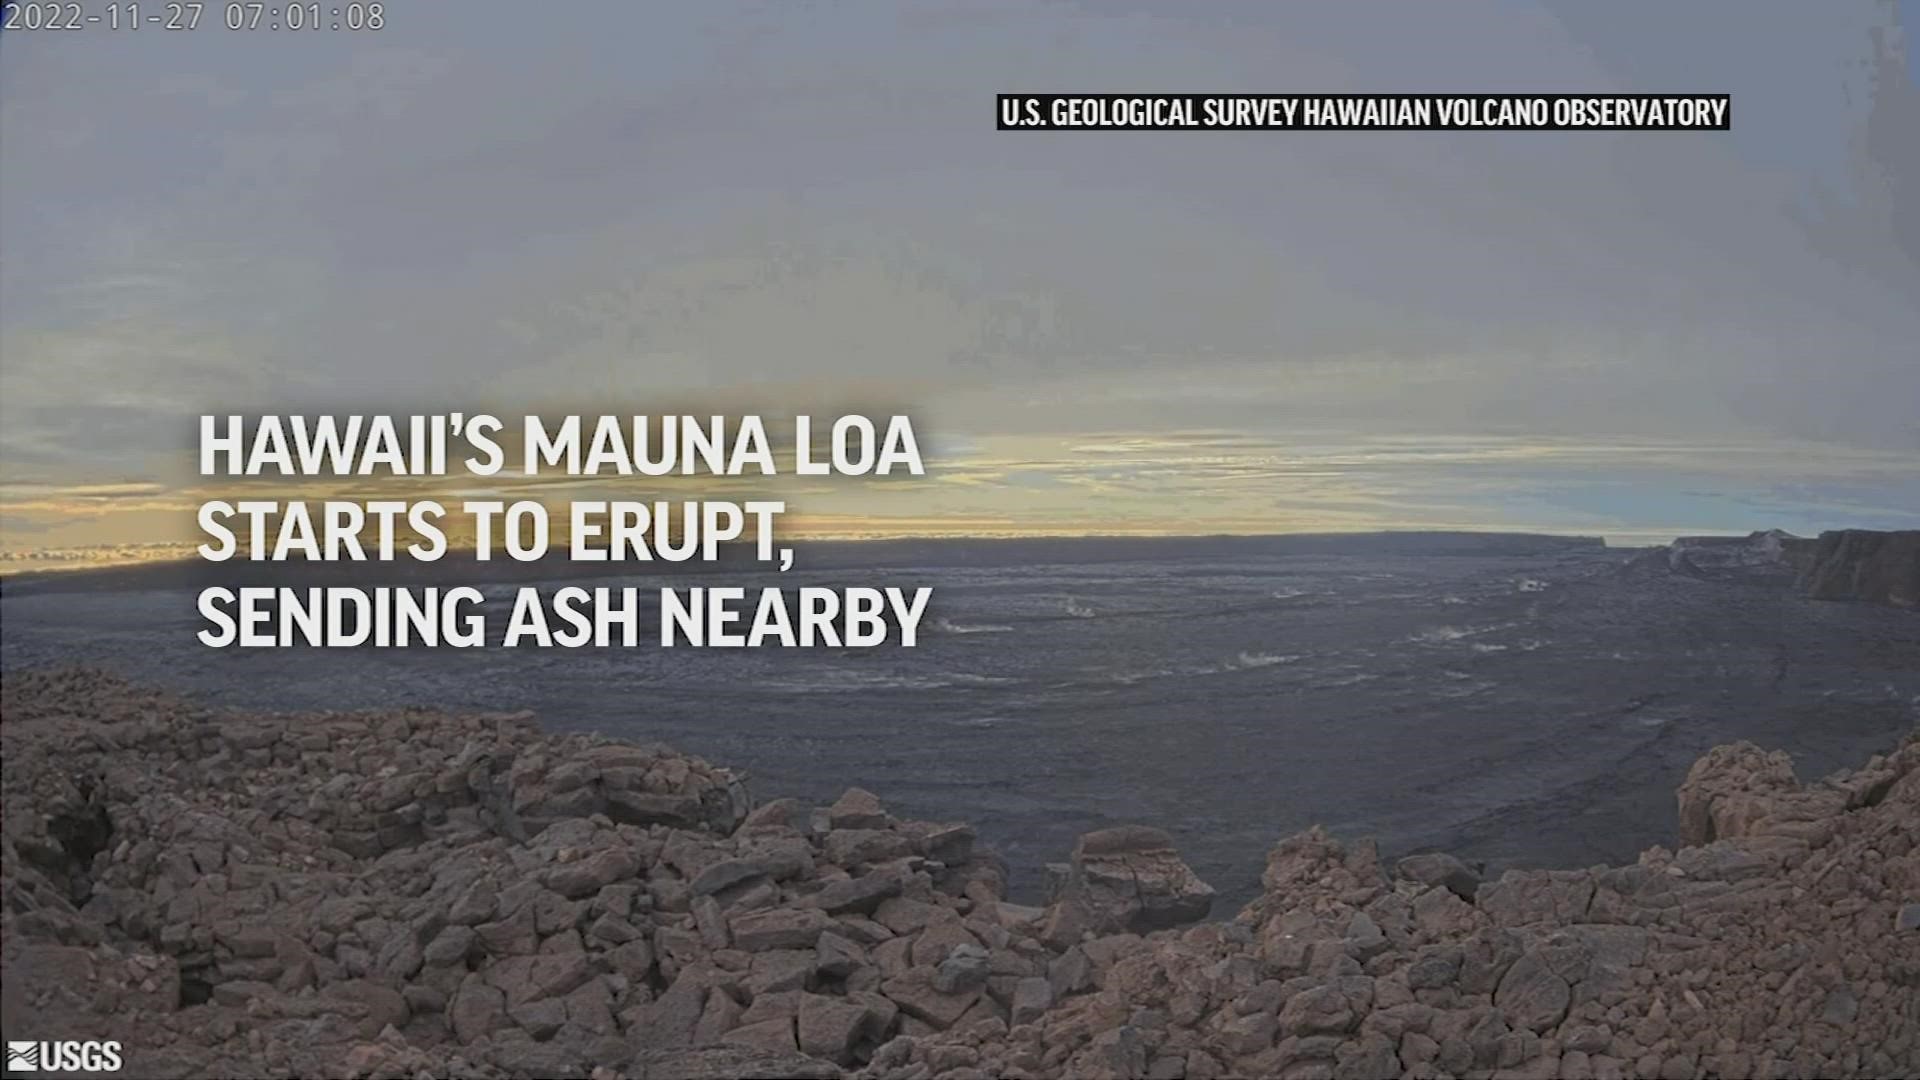 Early Monday, the USGS said lava flows were contained within the summit area and weren't threatening nearby communities.